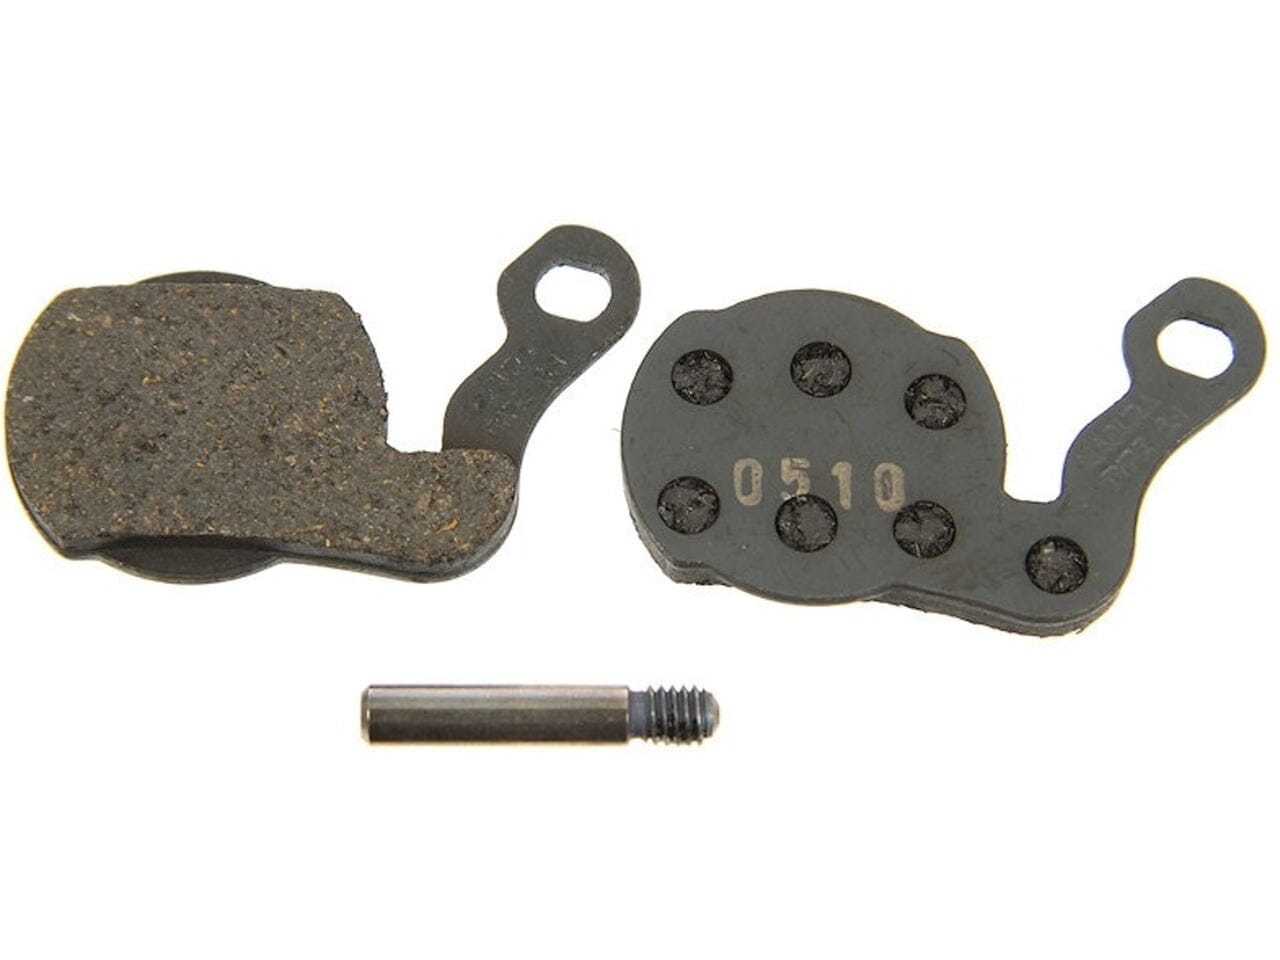 Magura 6 Series Brake Pads For Louise, Julie And Marta BRAKE PADS Melbourne Powered Electric Bikes & More 